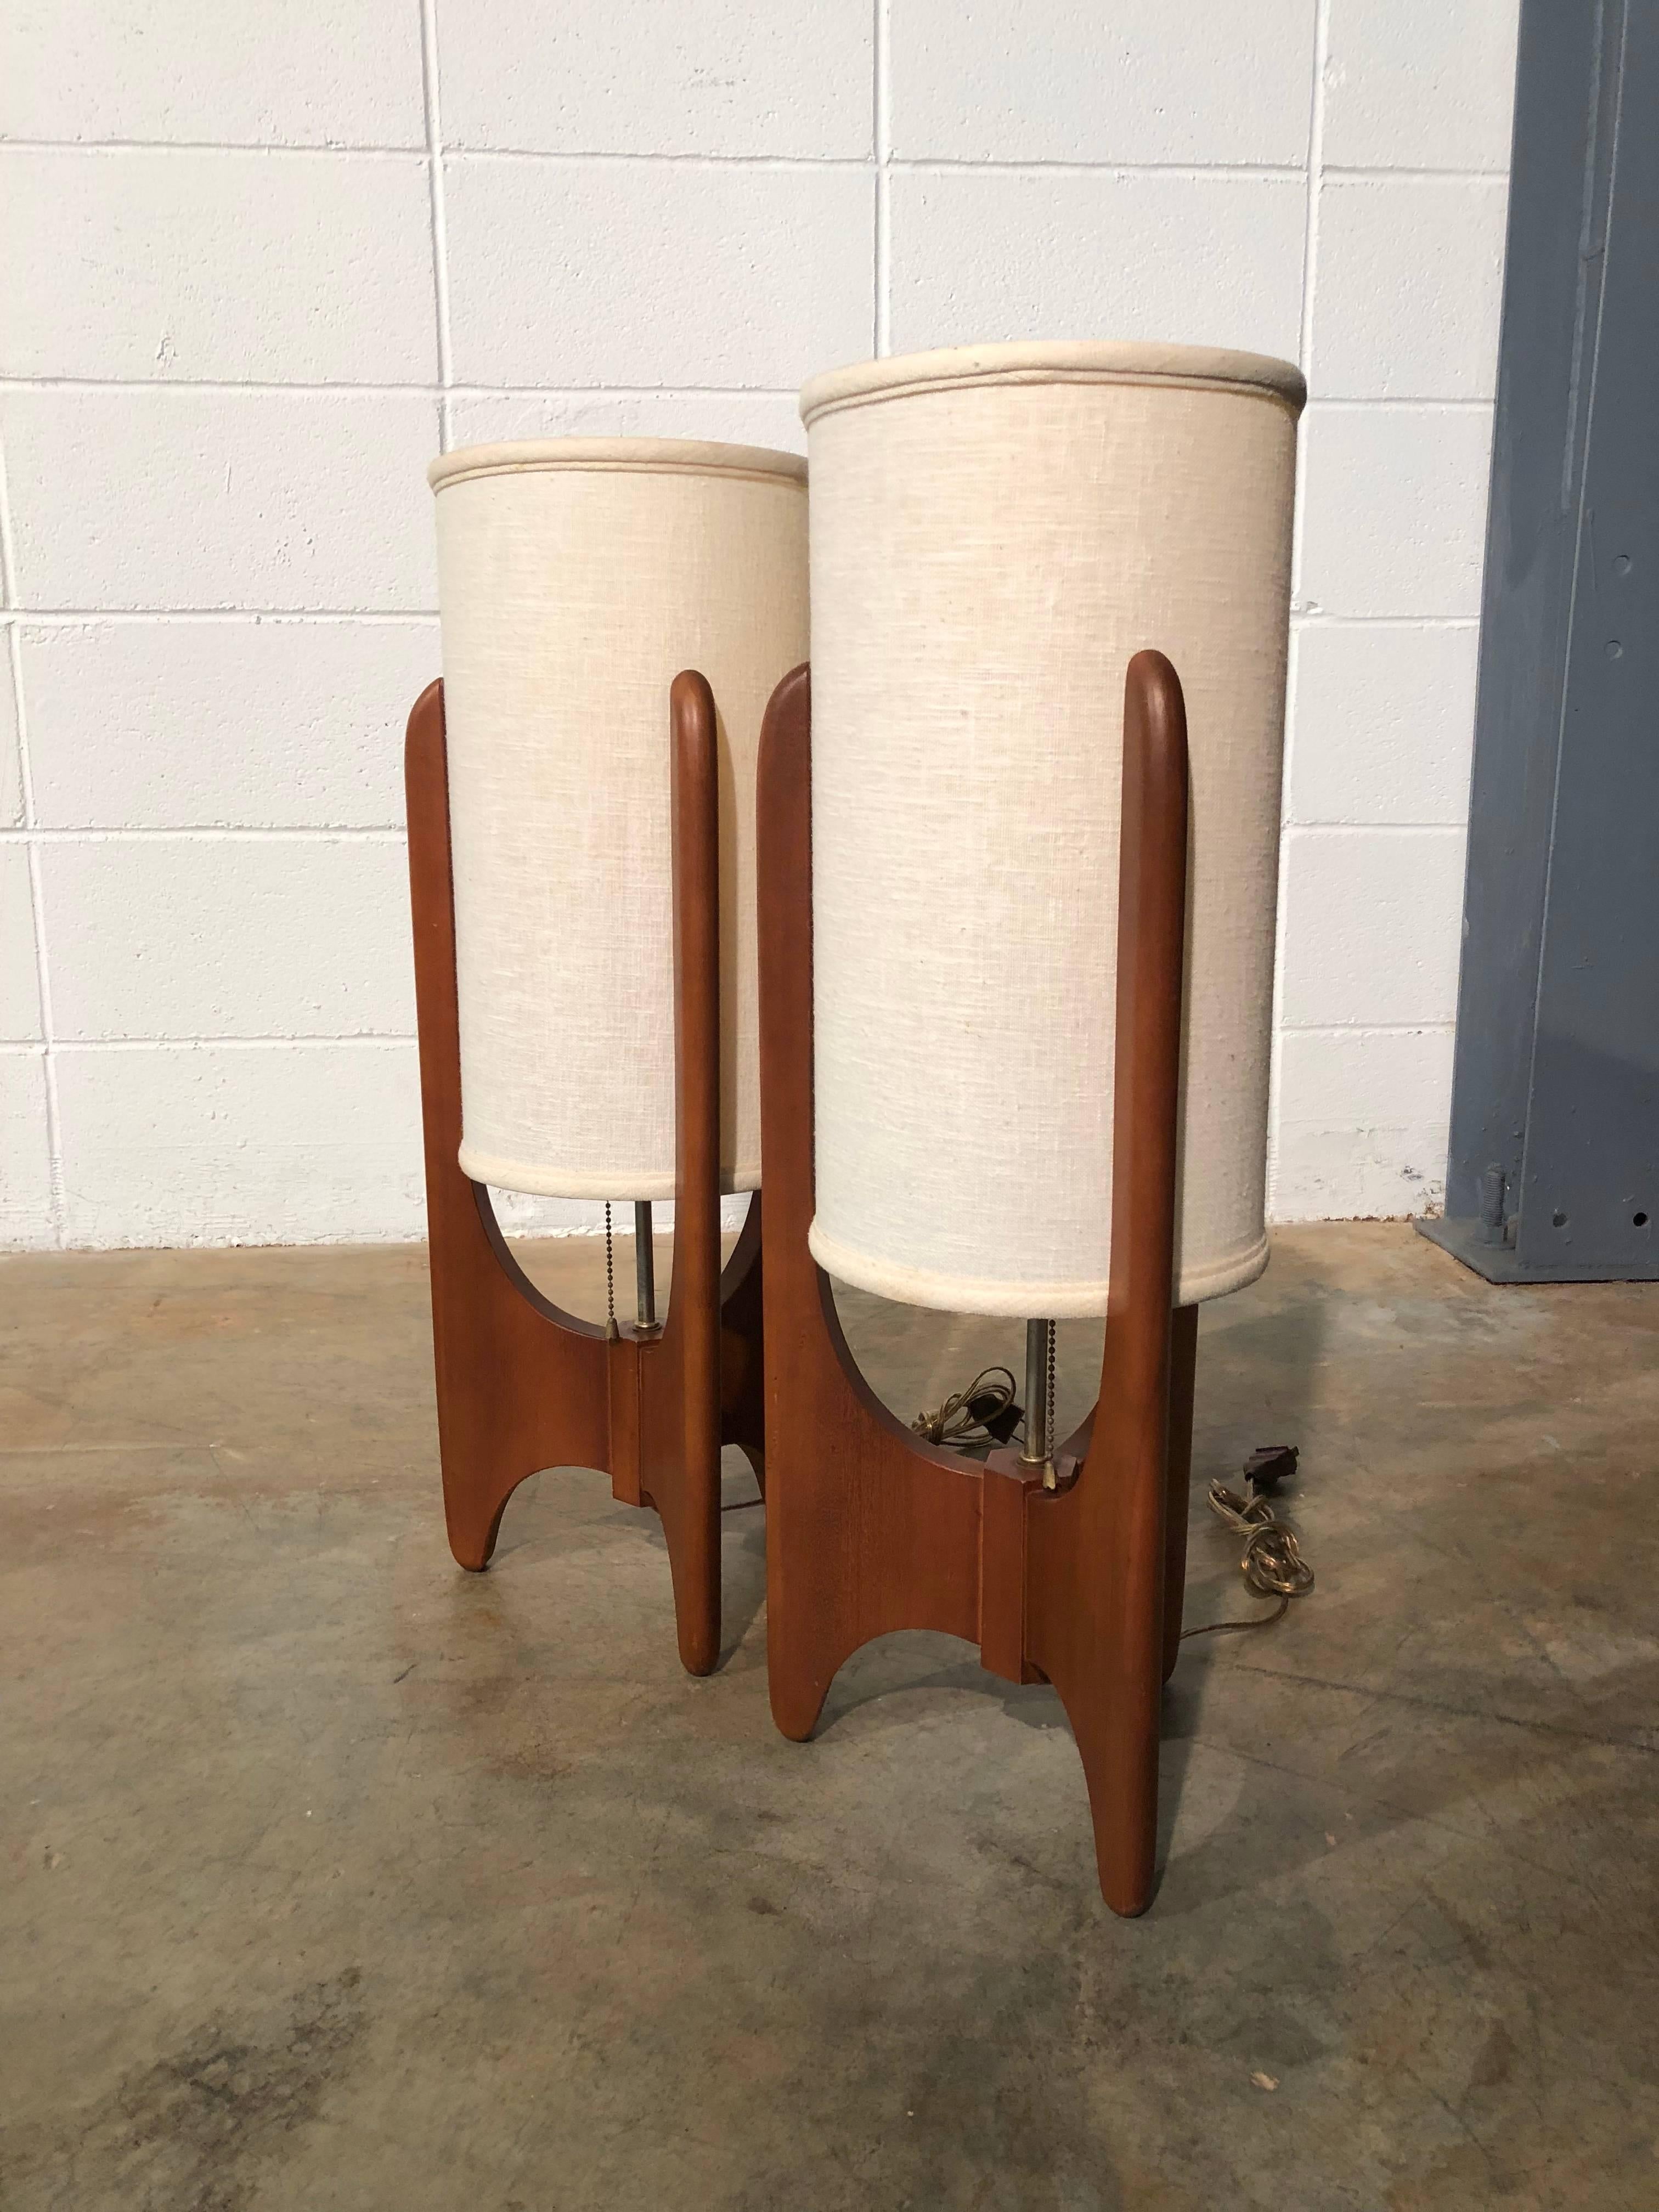 Pair of Mid-Century Modern sculpted walnut table lamps by Modeline.
Great example of Mid-Century Modern design.
The lamps are in great original condition and in perfect working order.
No known defects that would detract from value or aesthetics.